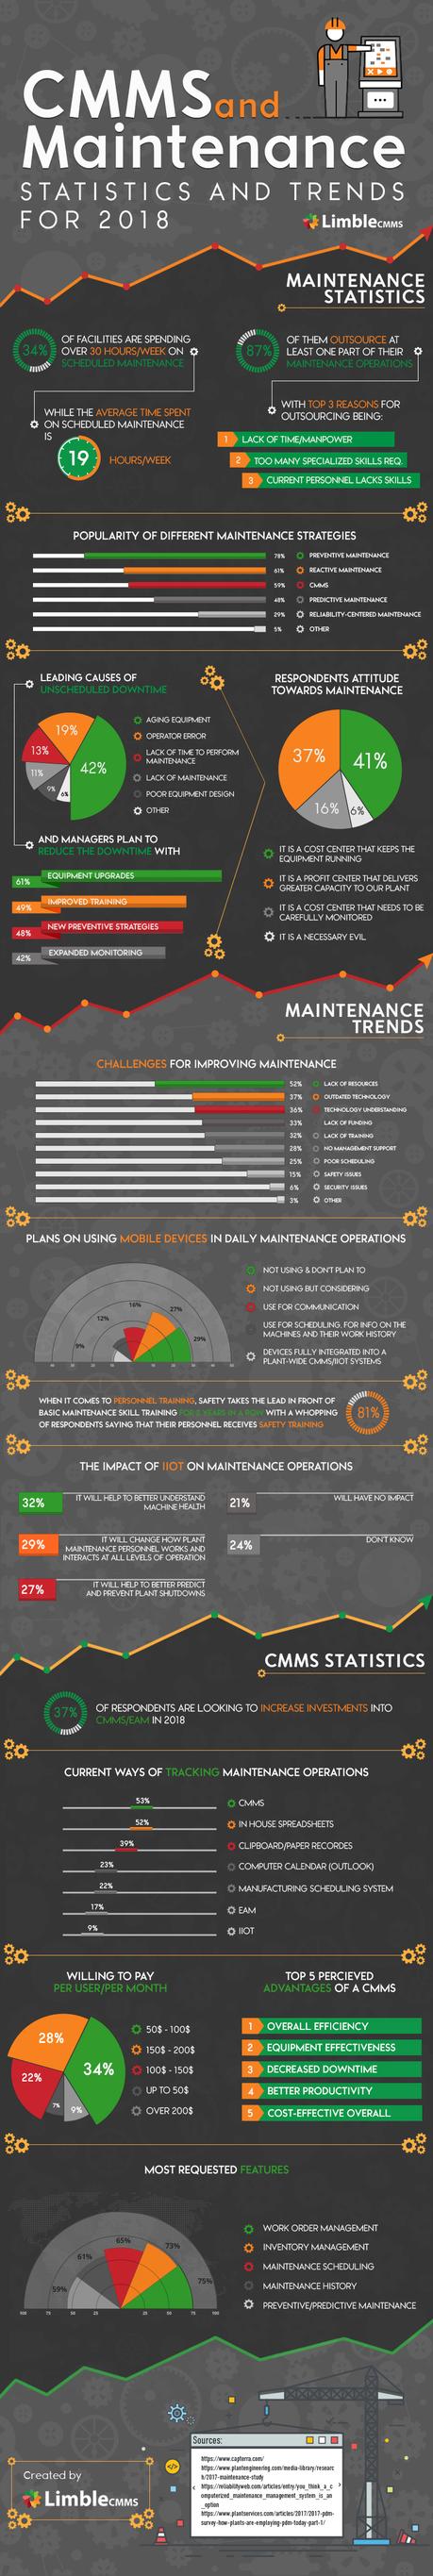 CMMS & Maintenance Statistics You Should Know Going Into 2018